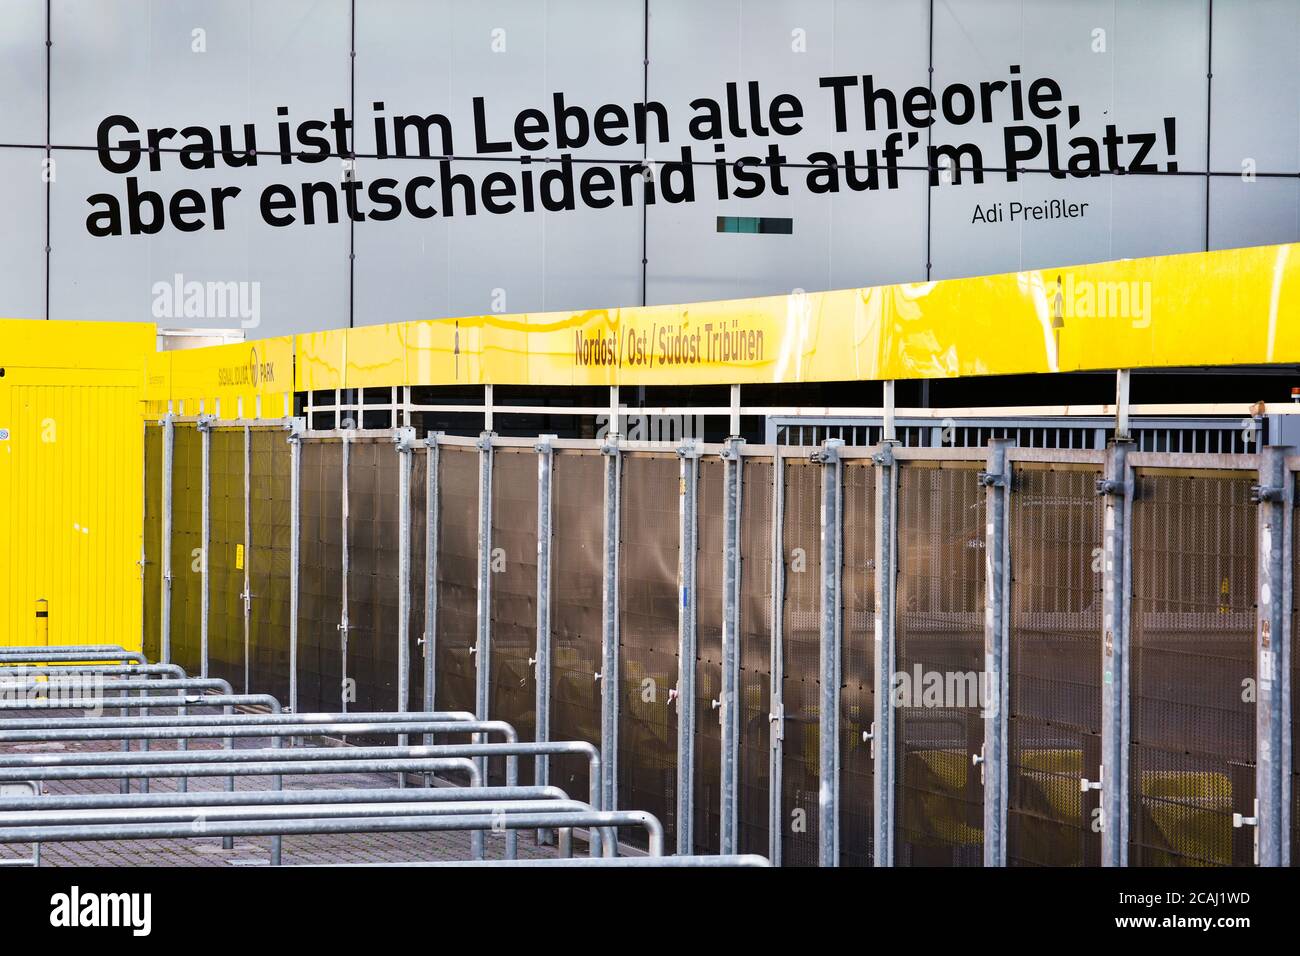 Dortmund, August 7th, 2020: Discussion about the reopening of the football stadiums for fans with a limited number of spectators due to the Corona crisis in the new 2020/21 football season. Photo: Closed entrance gates to the Signal Iduna Park (Westfalenstadion) of the BvB Dortmund Bundesliga soccer club with the quote 'Gray is all theory in life, but what matters is in the square', by Adi Preißler, former BvB player. Stock Photo